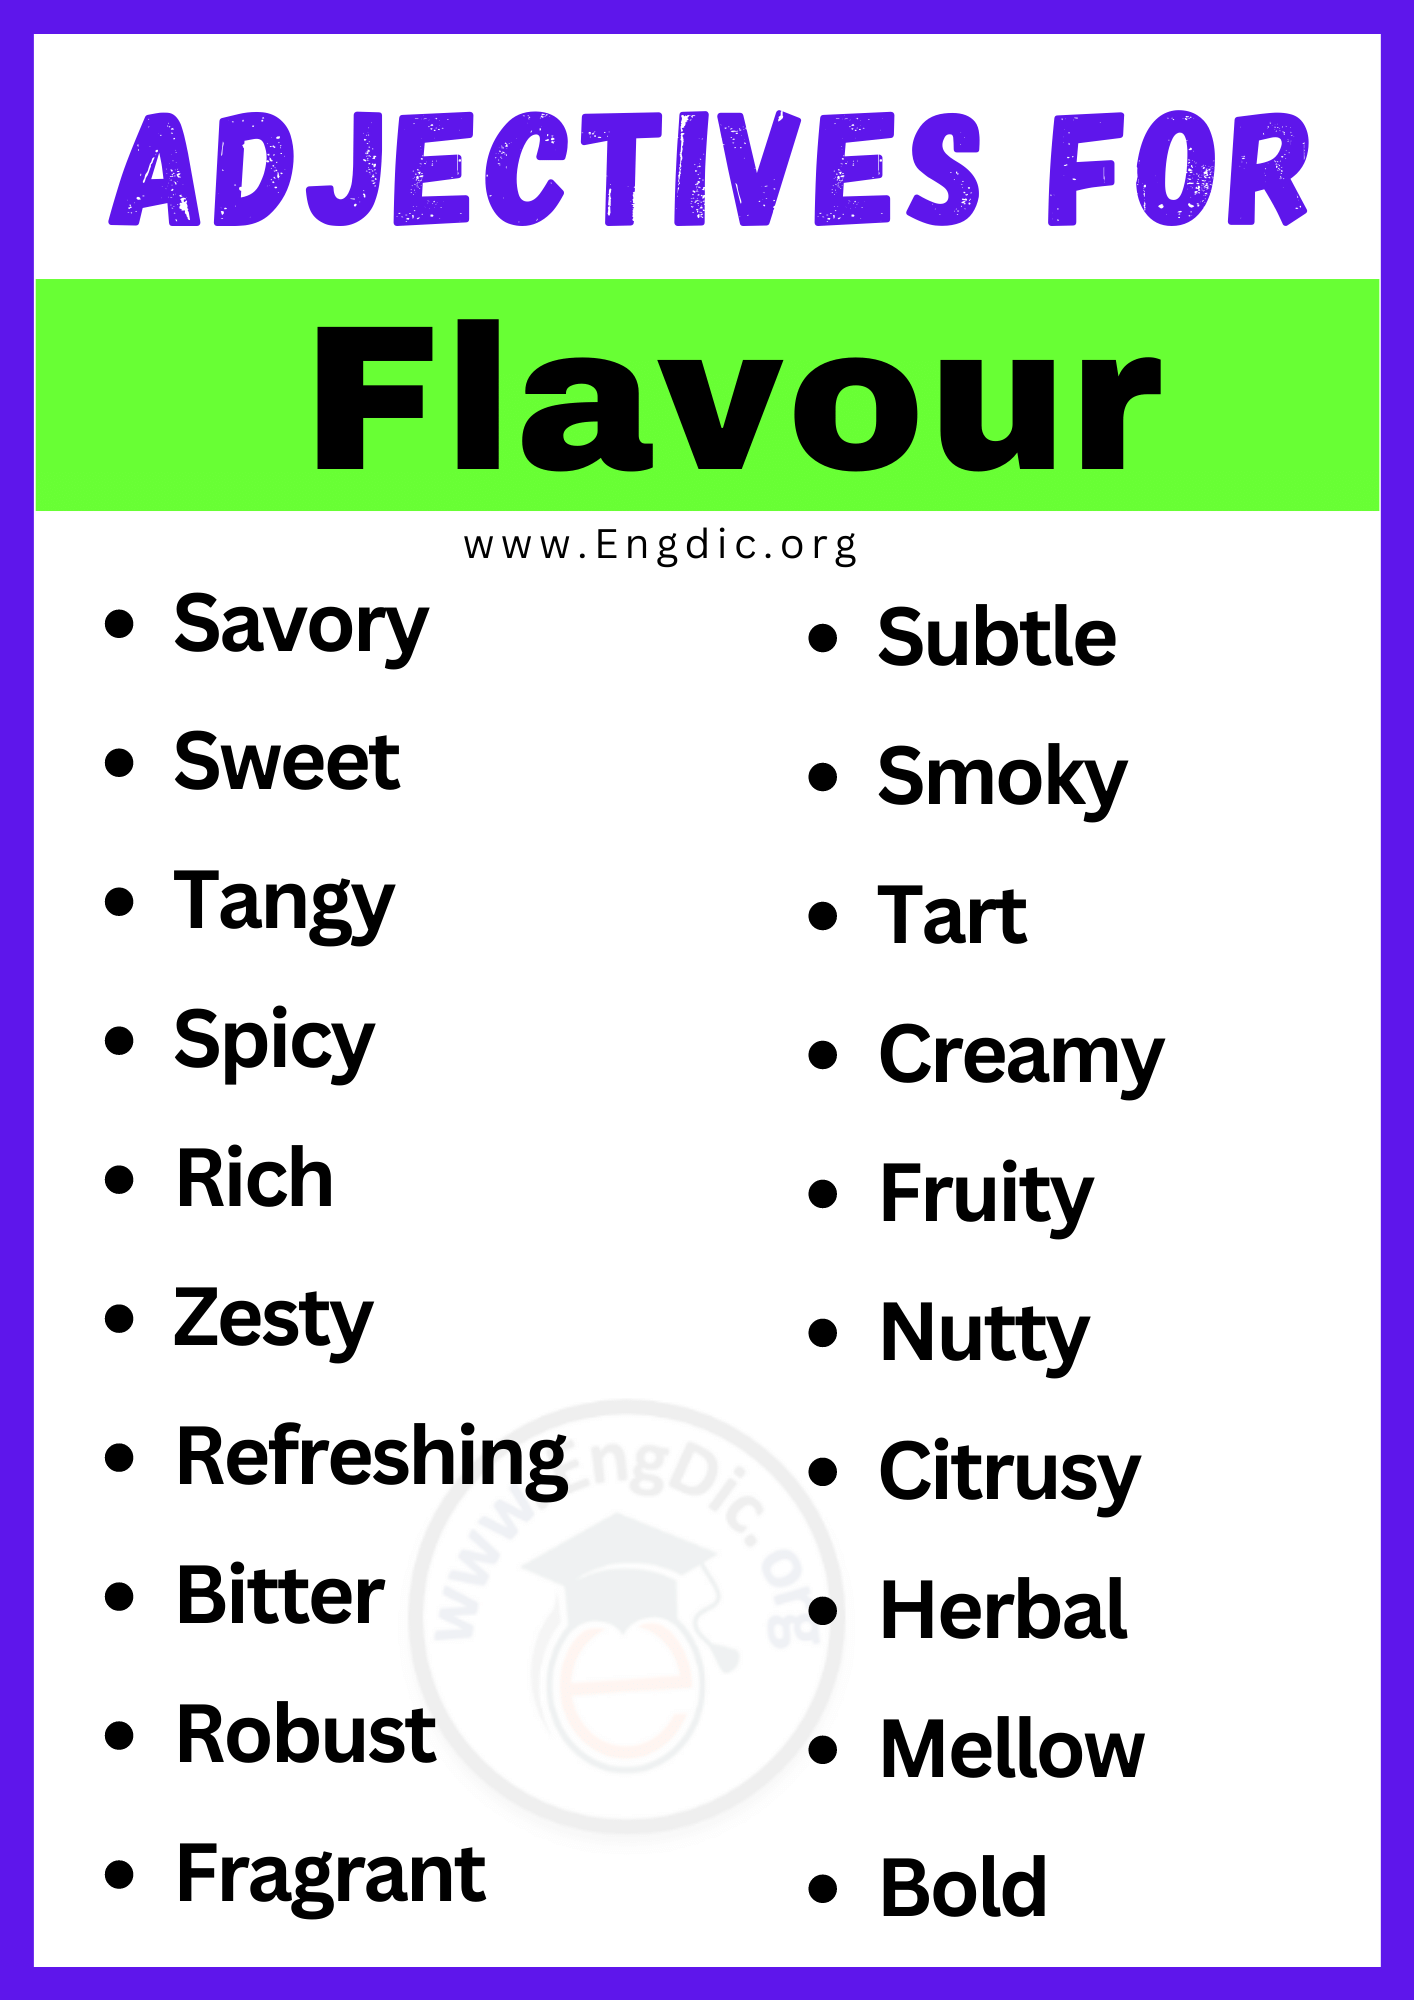 Adjectives for Flavour